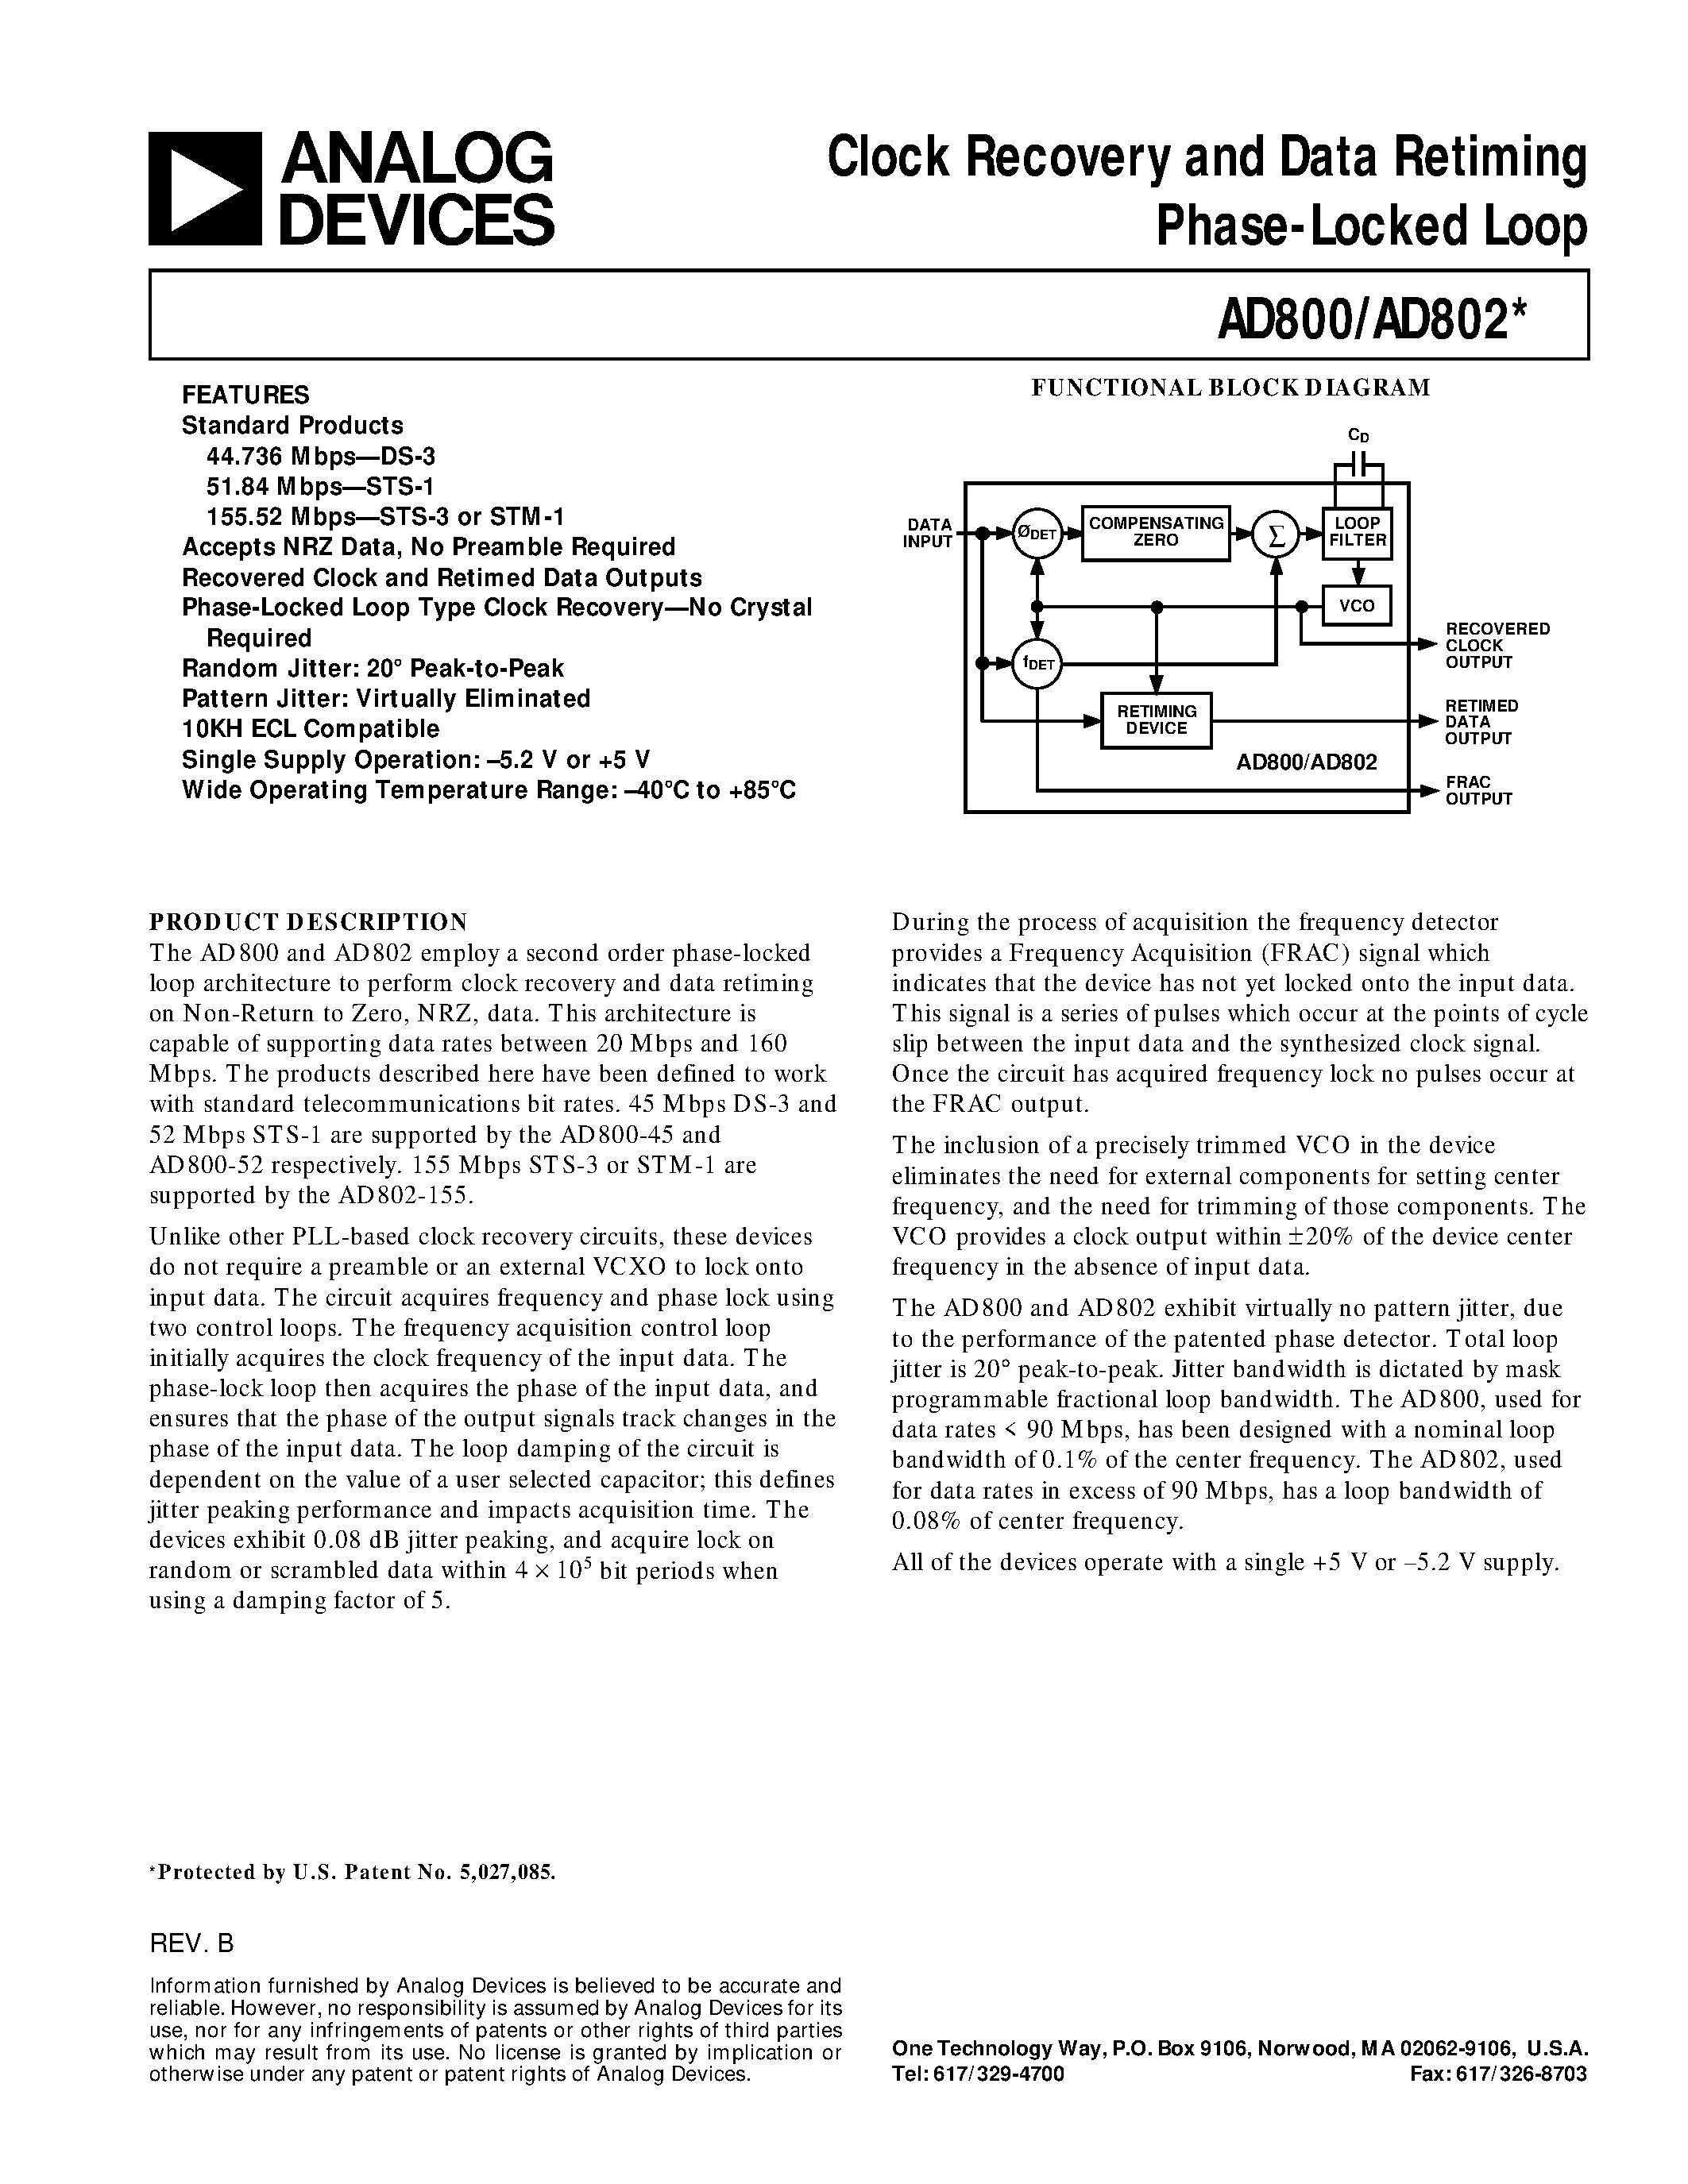 Datasheet AD800-45BQ - Clock Recovery and Data Retiming Phase-Locked Loop page 1